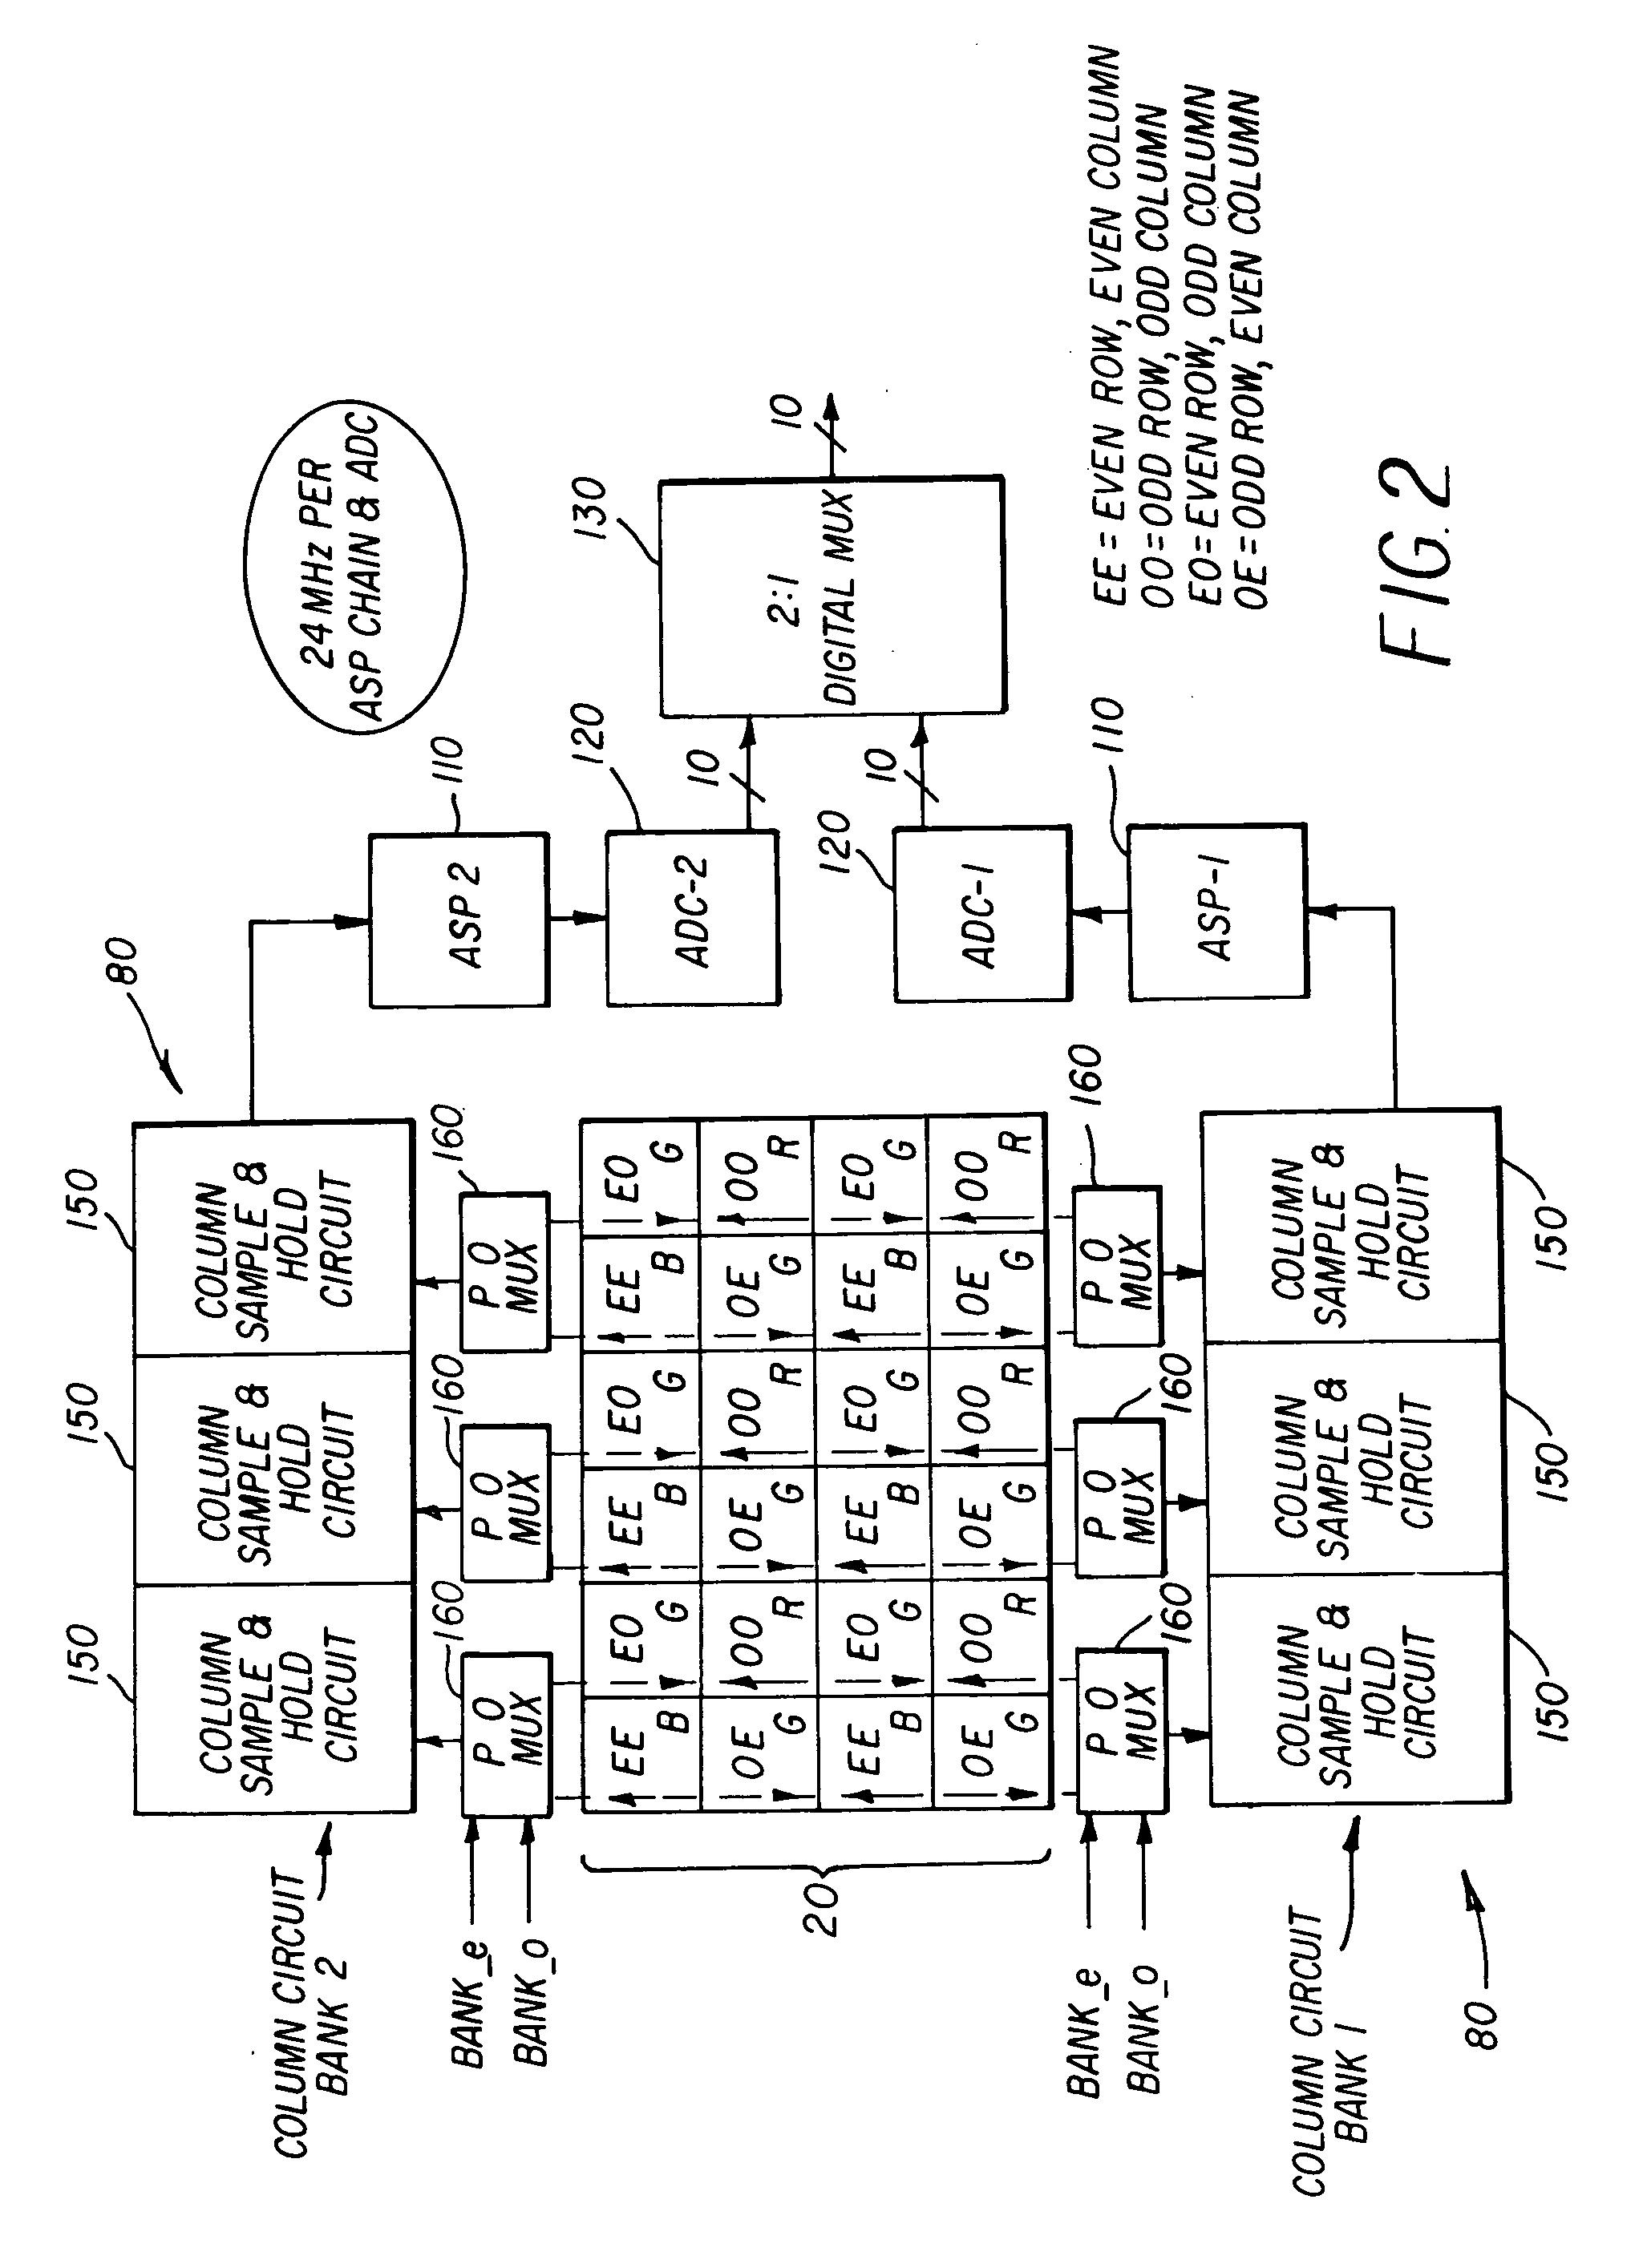 Image sensor with charge binning and dual channel readout